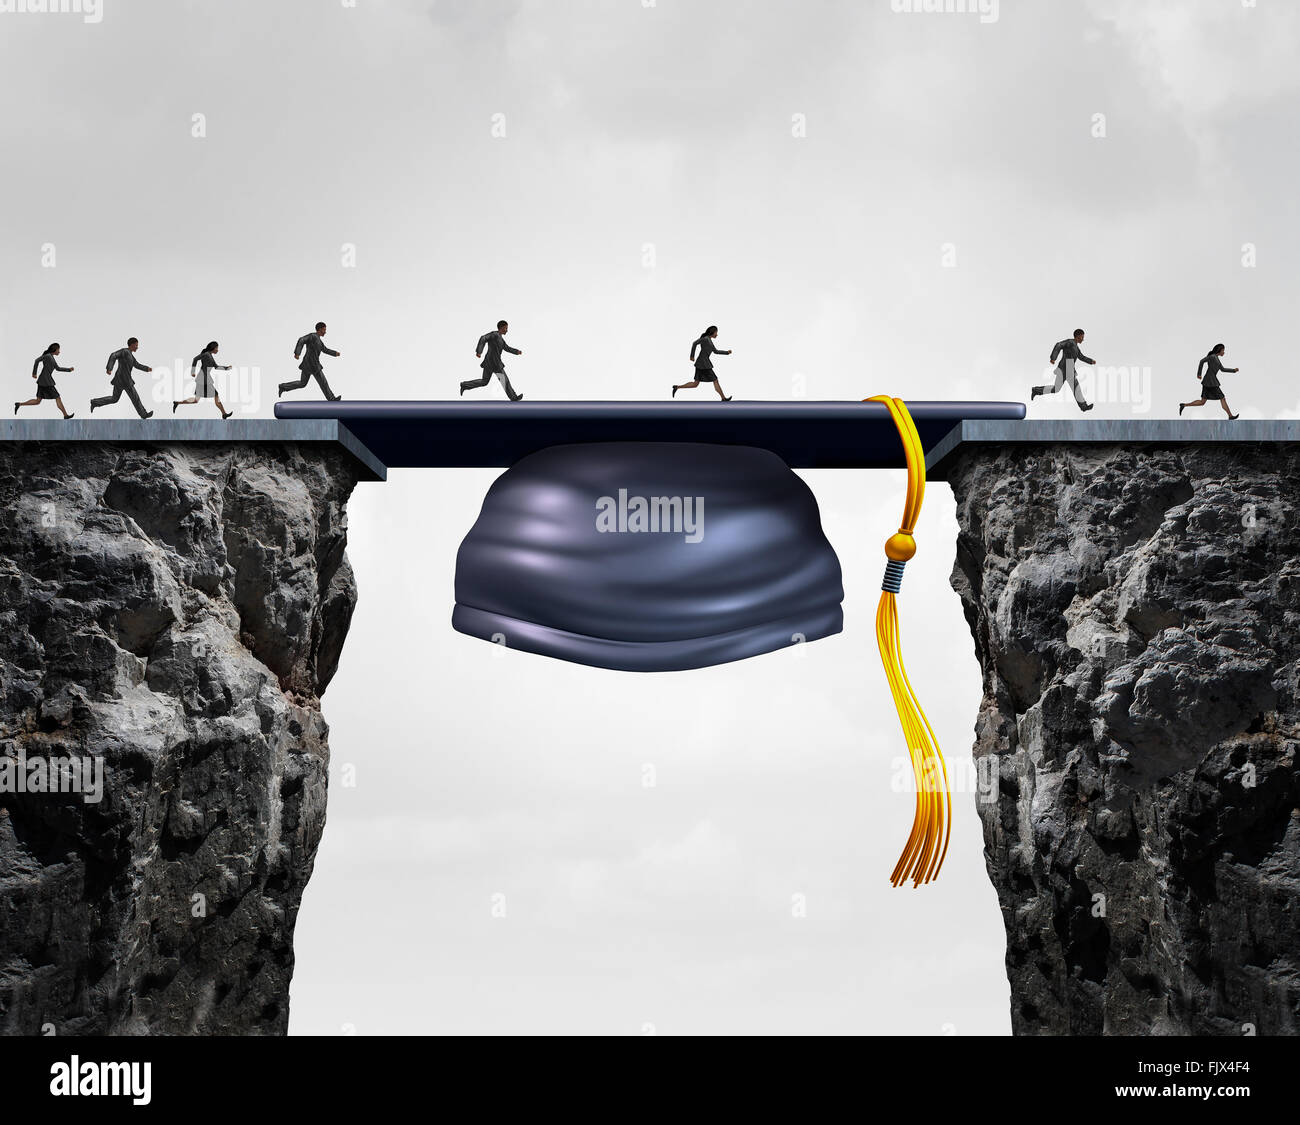 Education career opportunities concept as a group of graduating university studends crossing a mortarboard or graduation cap acting as a bridge to provide an opportunity and bridging the gap for business success. Stock Photo